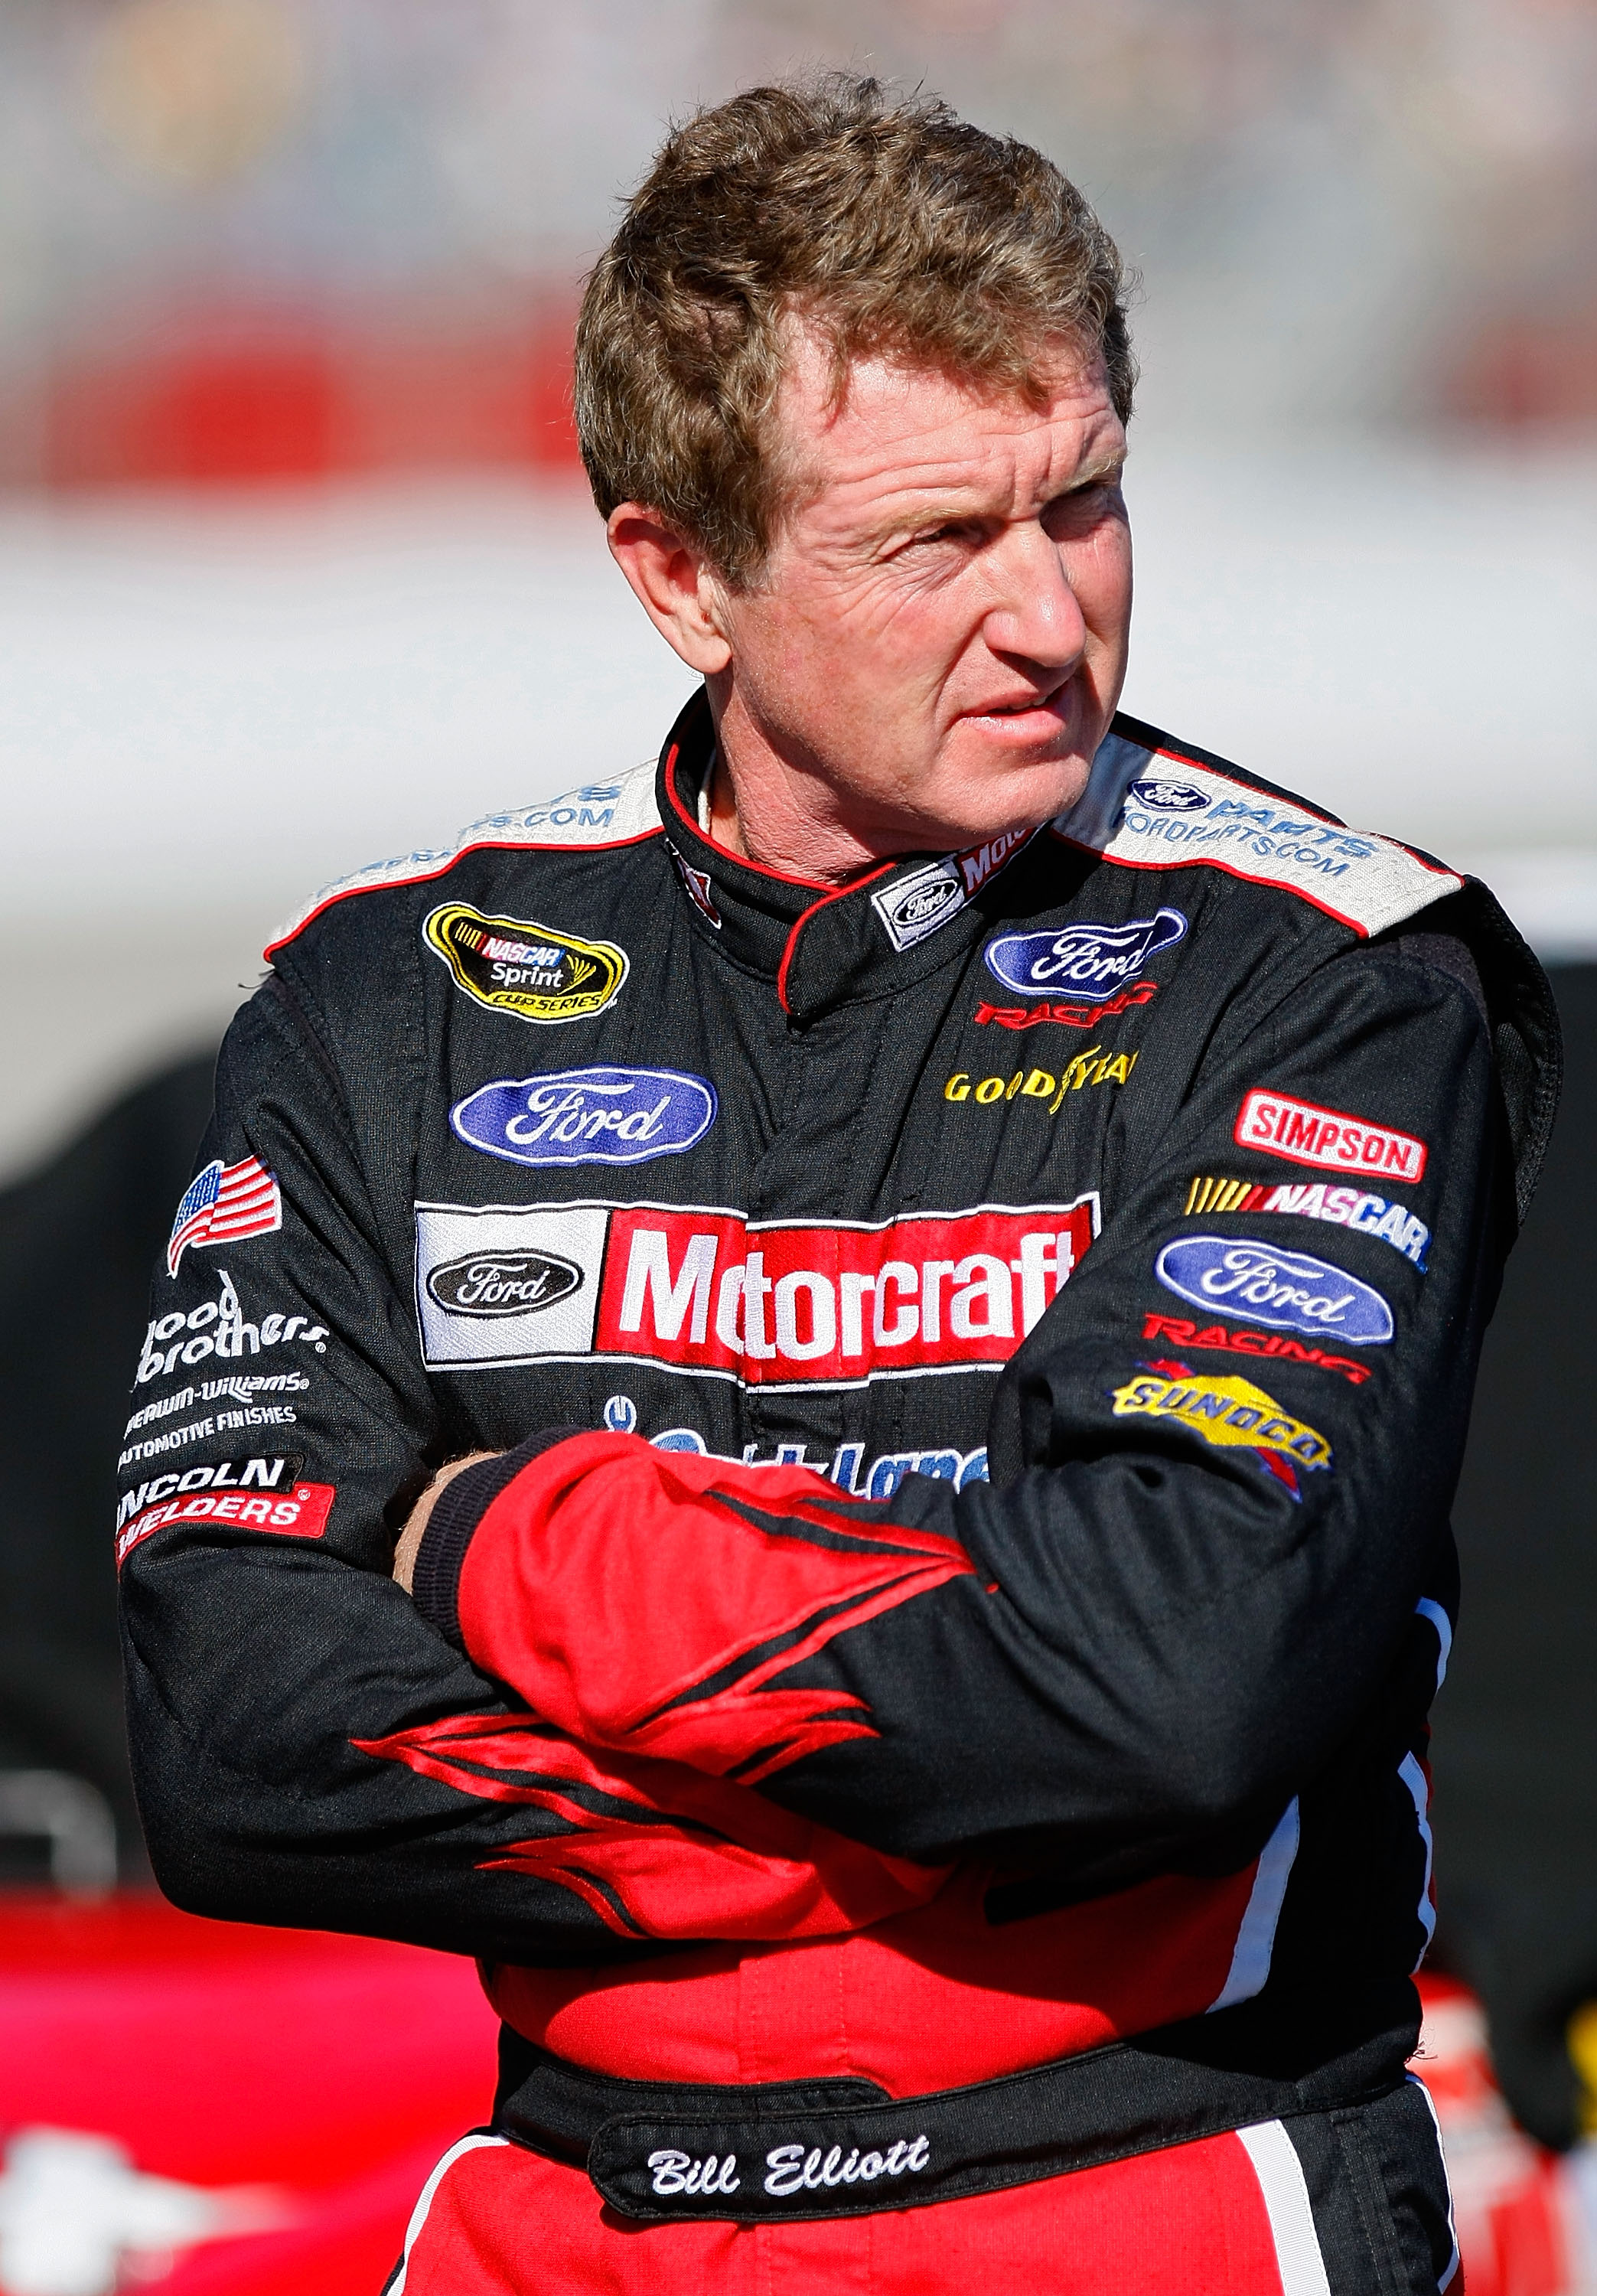 HAMPTON, GA - SEPTEMBER 04: Bill Elliott, driver of the #21 FordParts.com Ford, stands on the grid during qualifying for the NASCAR Sprint Cup Series Emory Healthcare 500 at Atlanta Motor Speedway on September 4, 2010 in Hampton, Georgia.  (Photo by Geoff